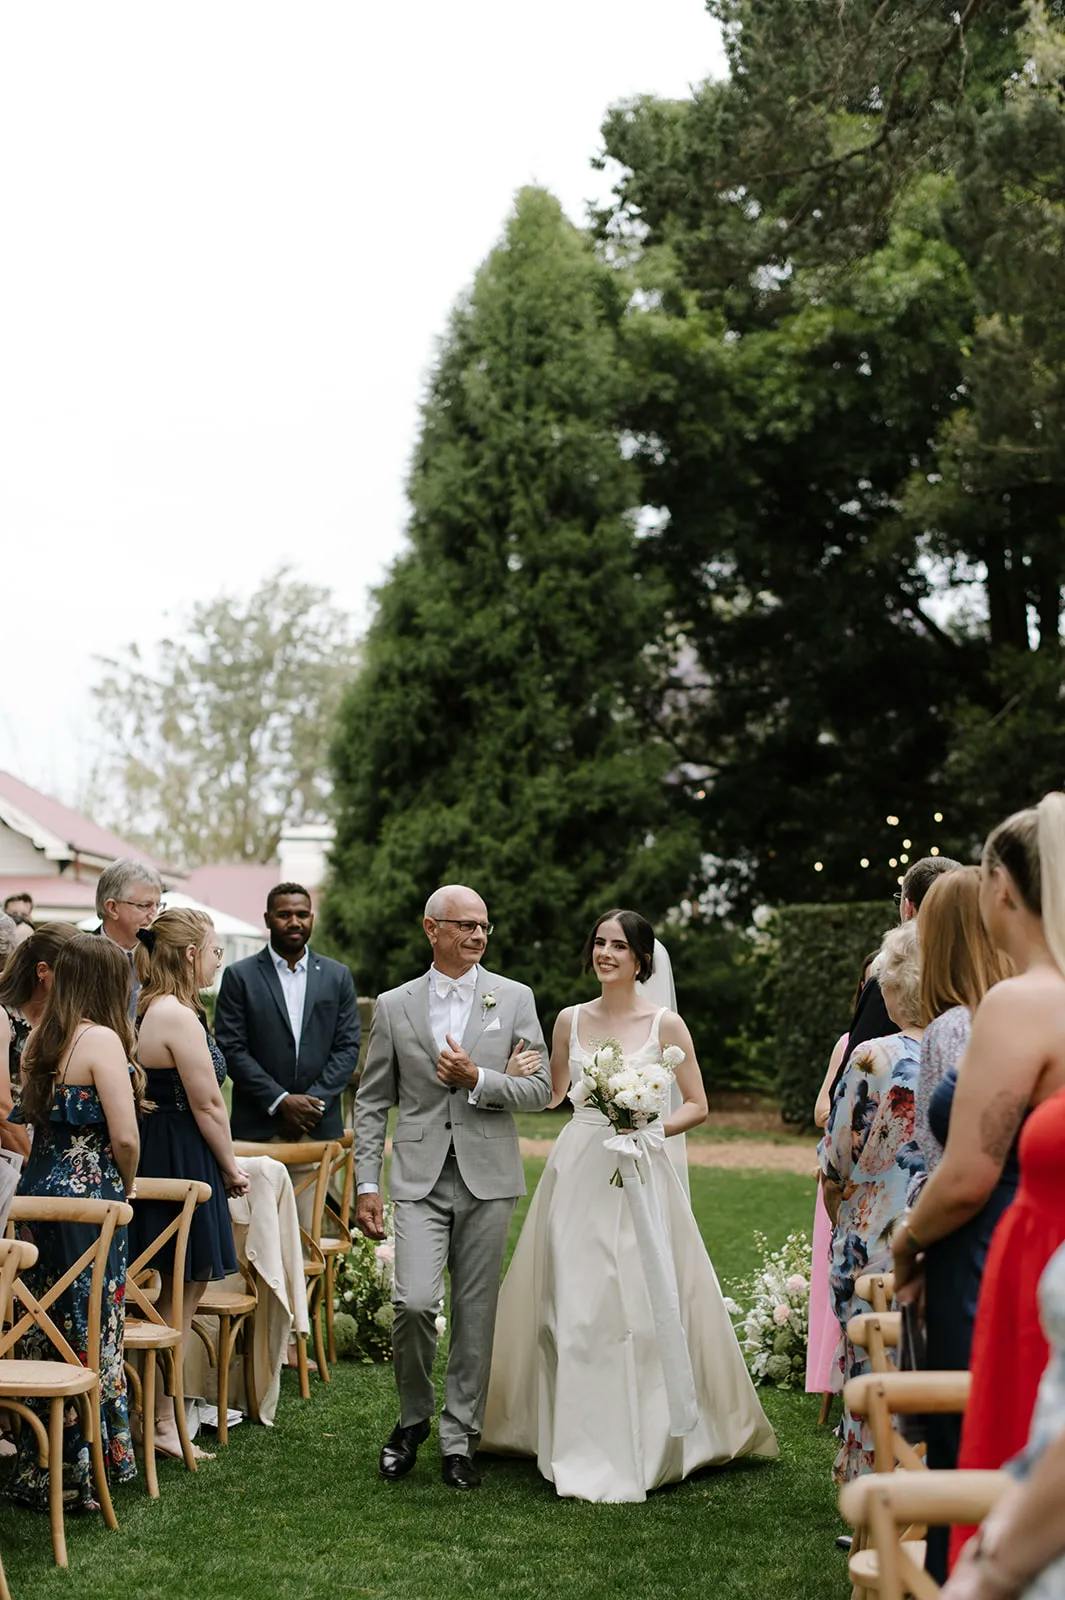 A bride, dressed in a white wedding gown and holding a bouquet, walks down an outdoor aisle with an older man in a light gray suit. Guests on either side of the aisle watch her, with greenery and trees in the background.